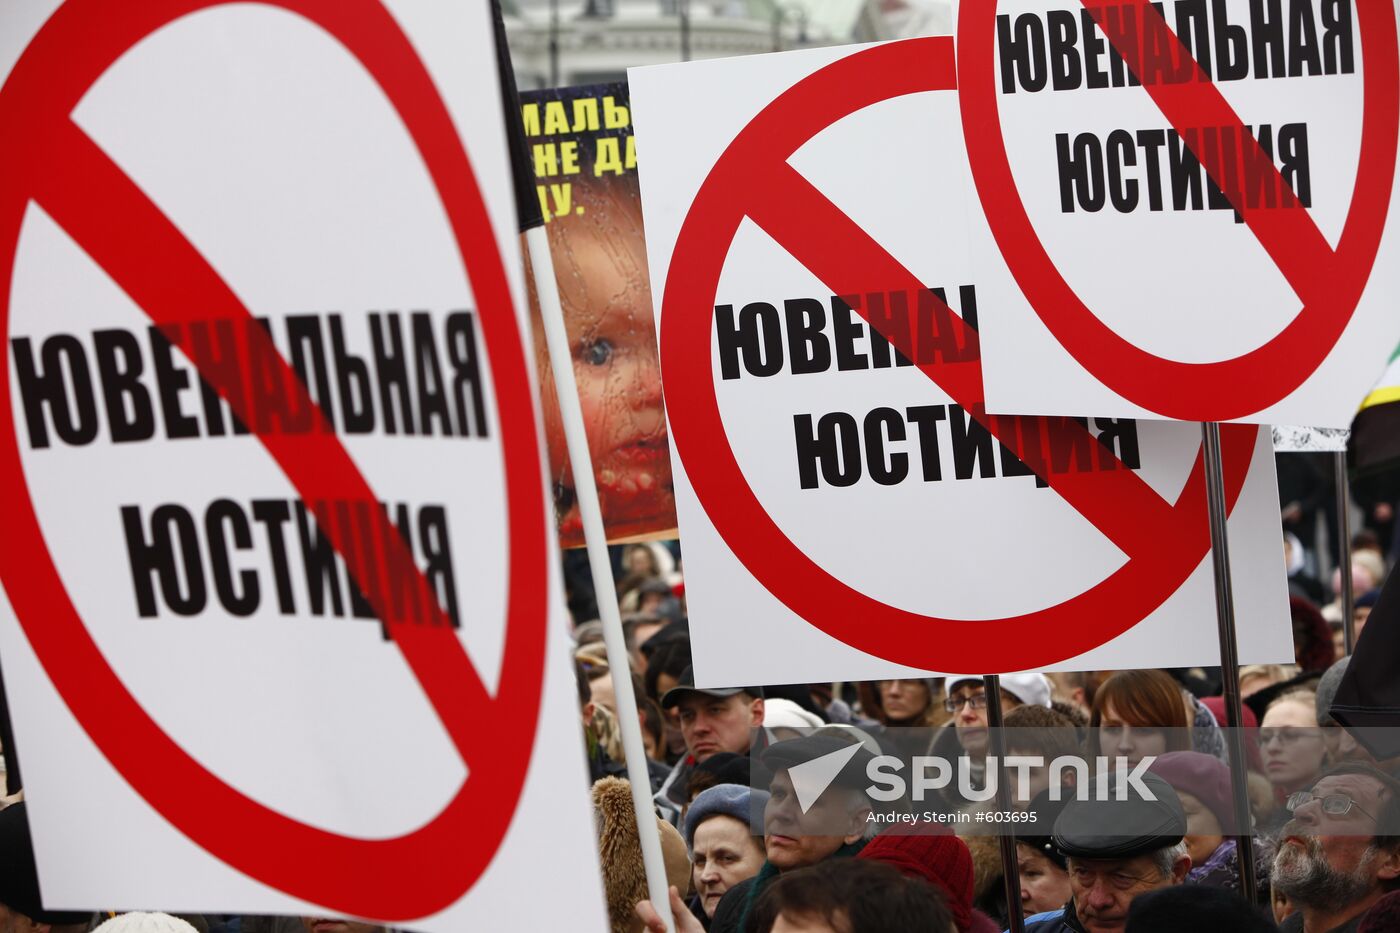 Rally against juvenile justice in Russia